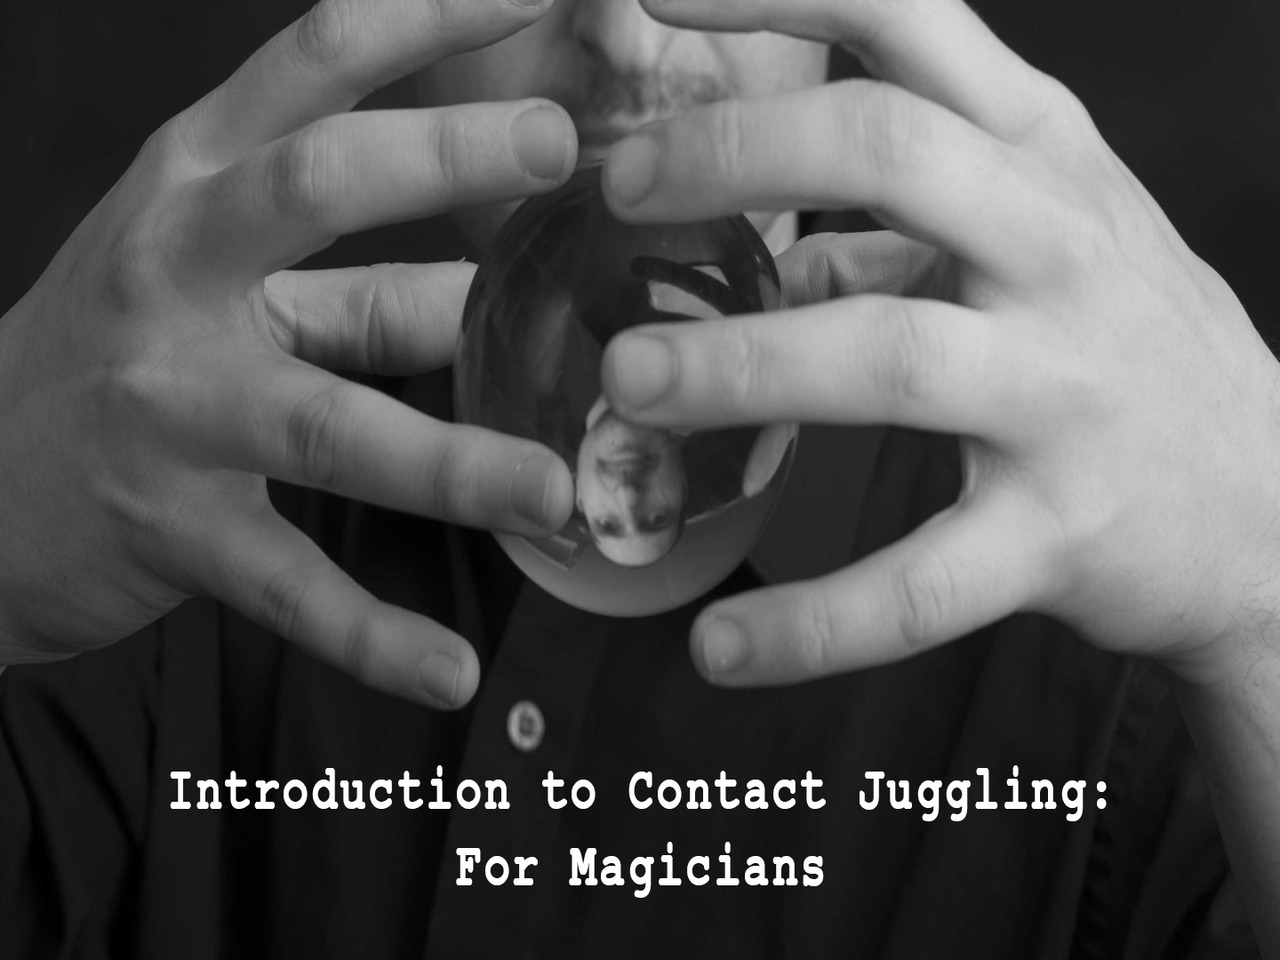 Steve WIlson - Introduction to Contact Juggling For Magicians